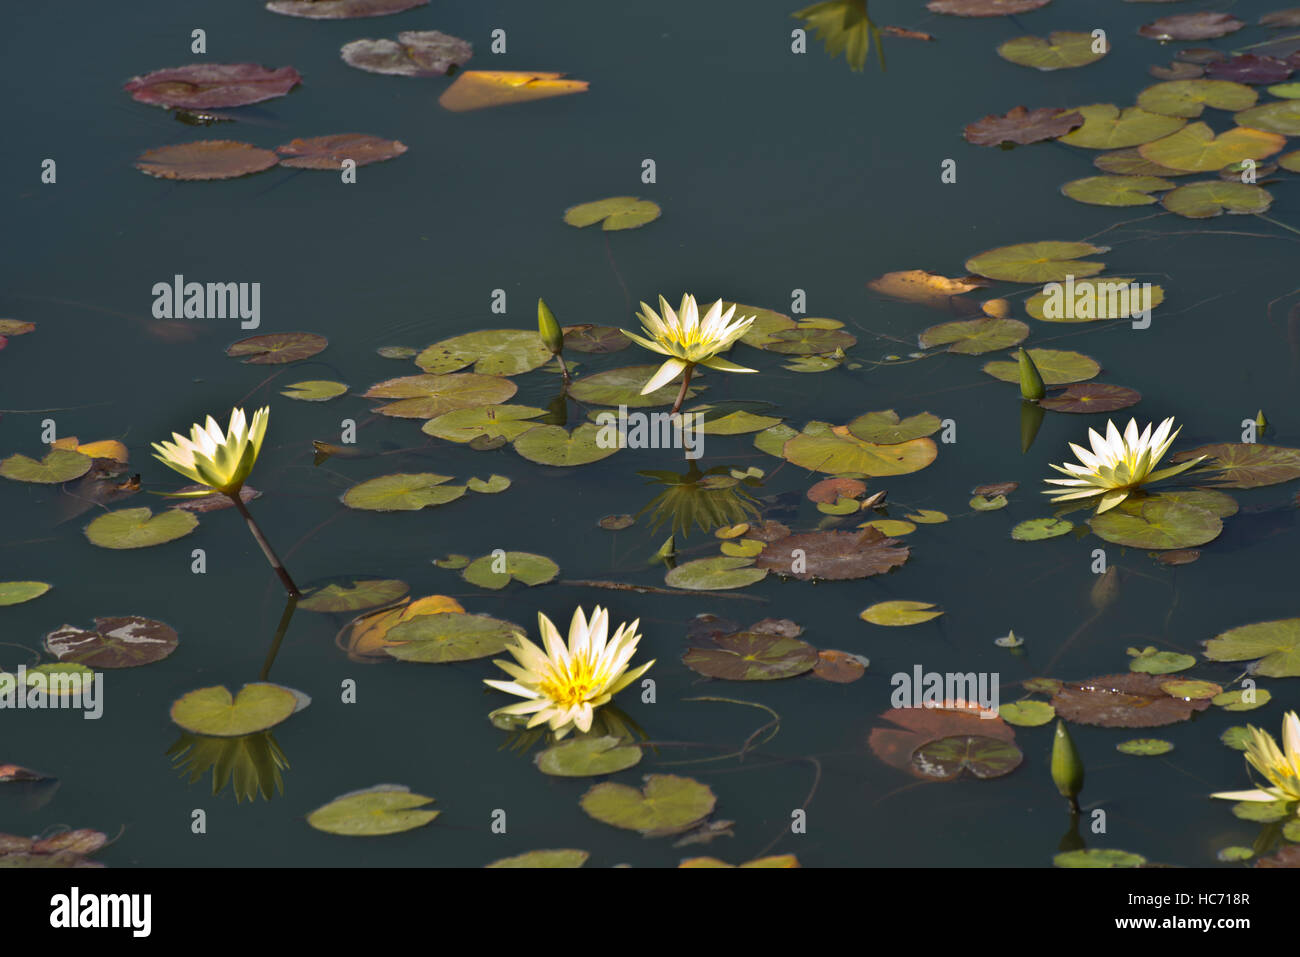 Photograph of yellow waterlilies and lily pads in a pond. Stock Photo